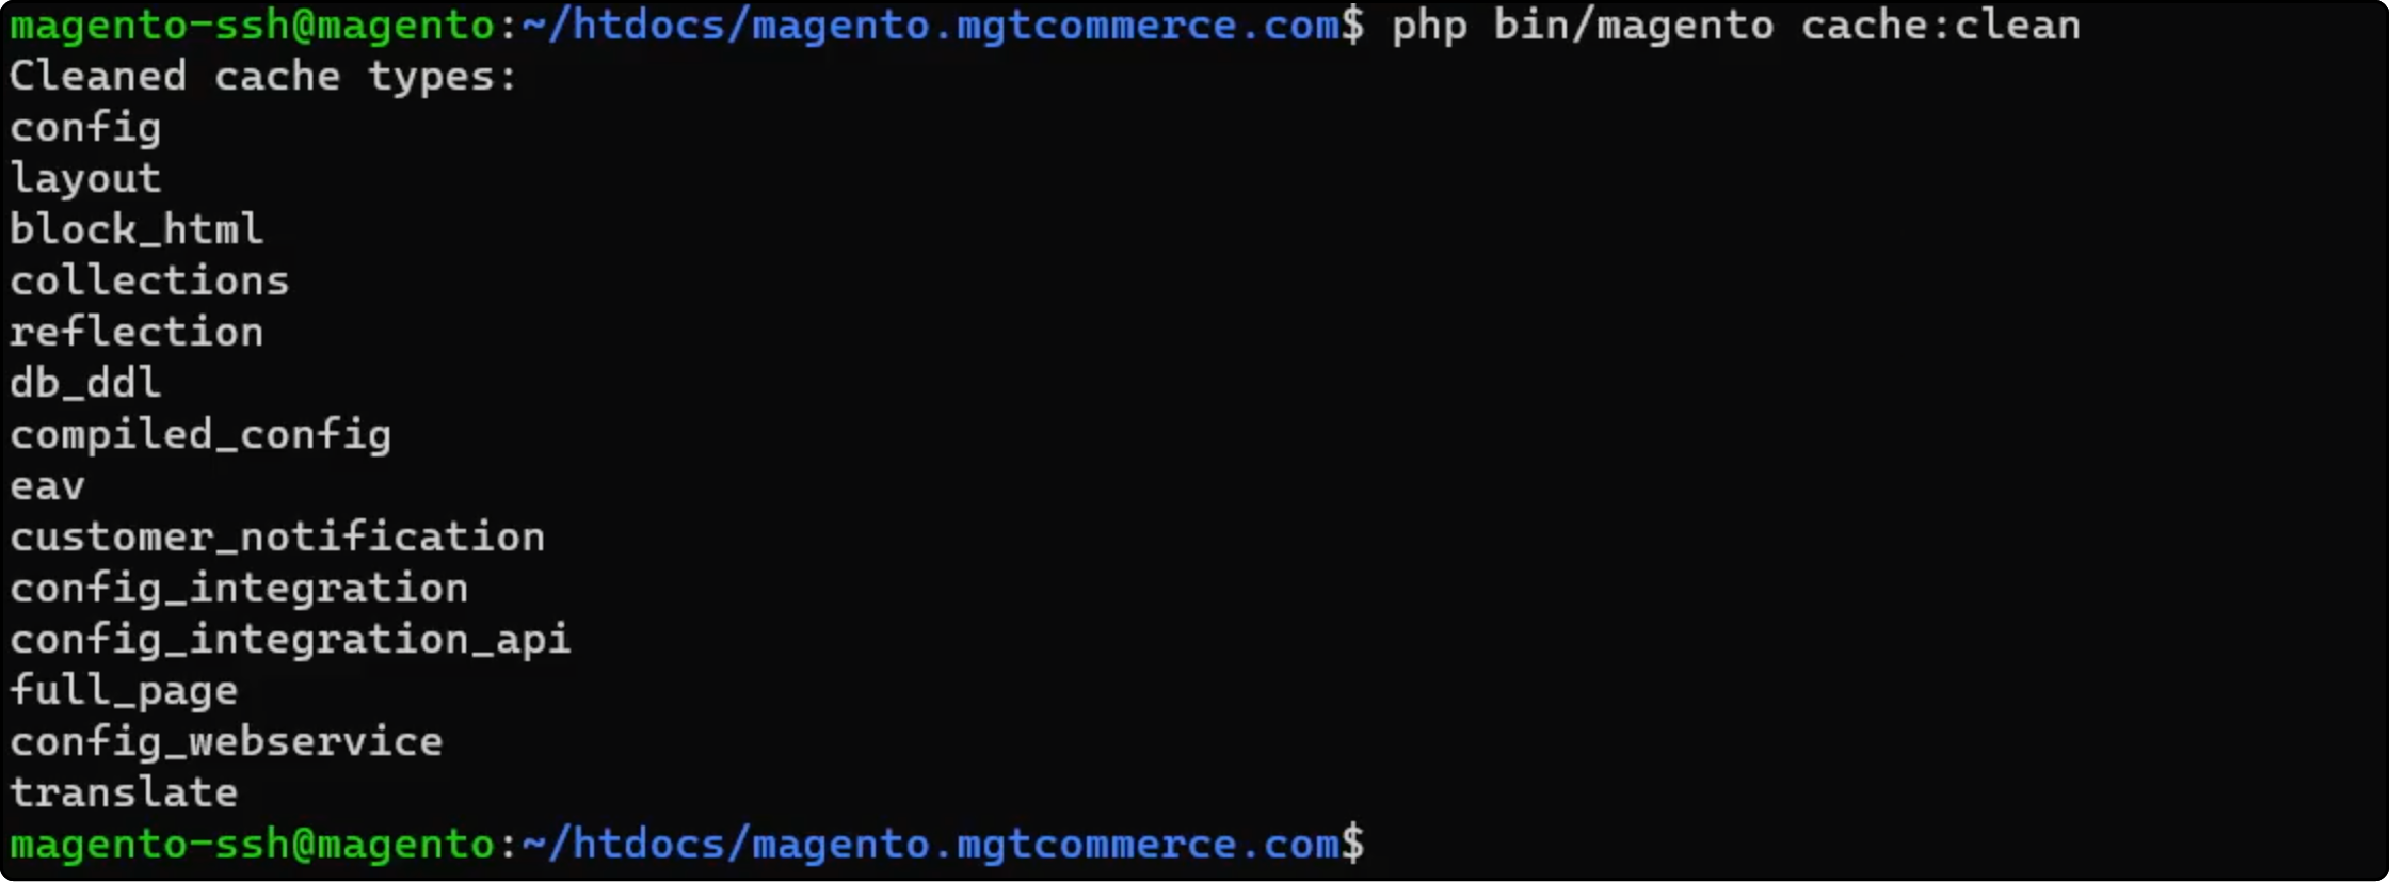 Command Line Interface Showing Magento 2 Cache Clearing Process